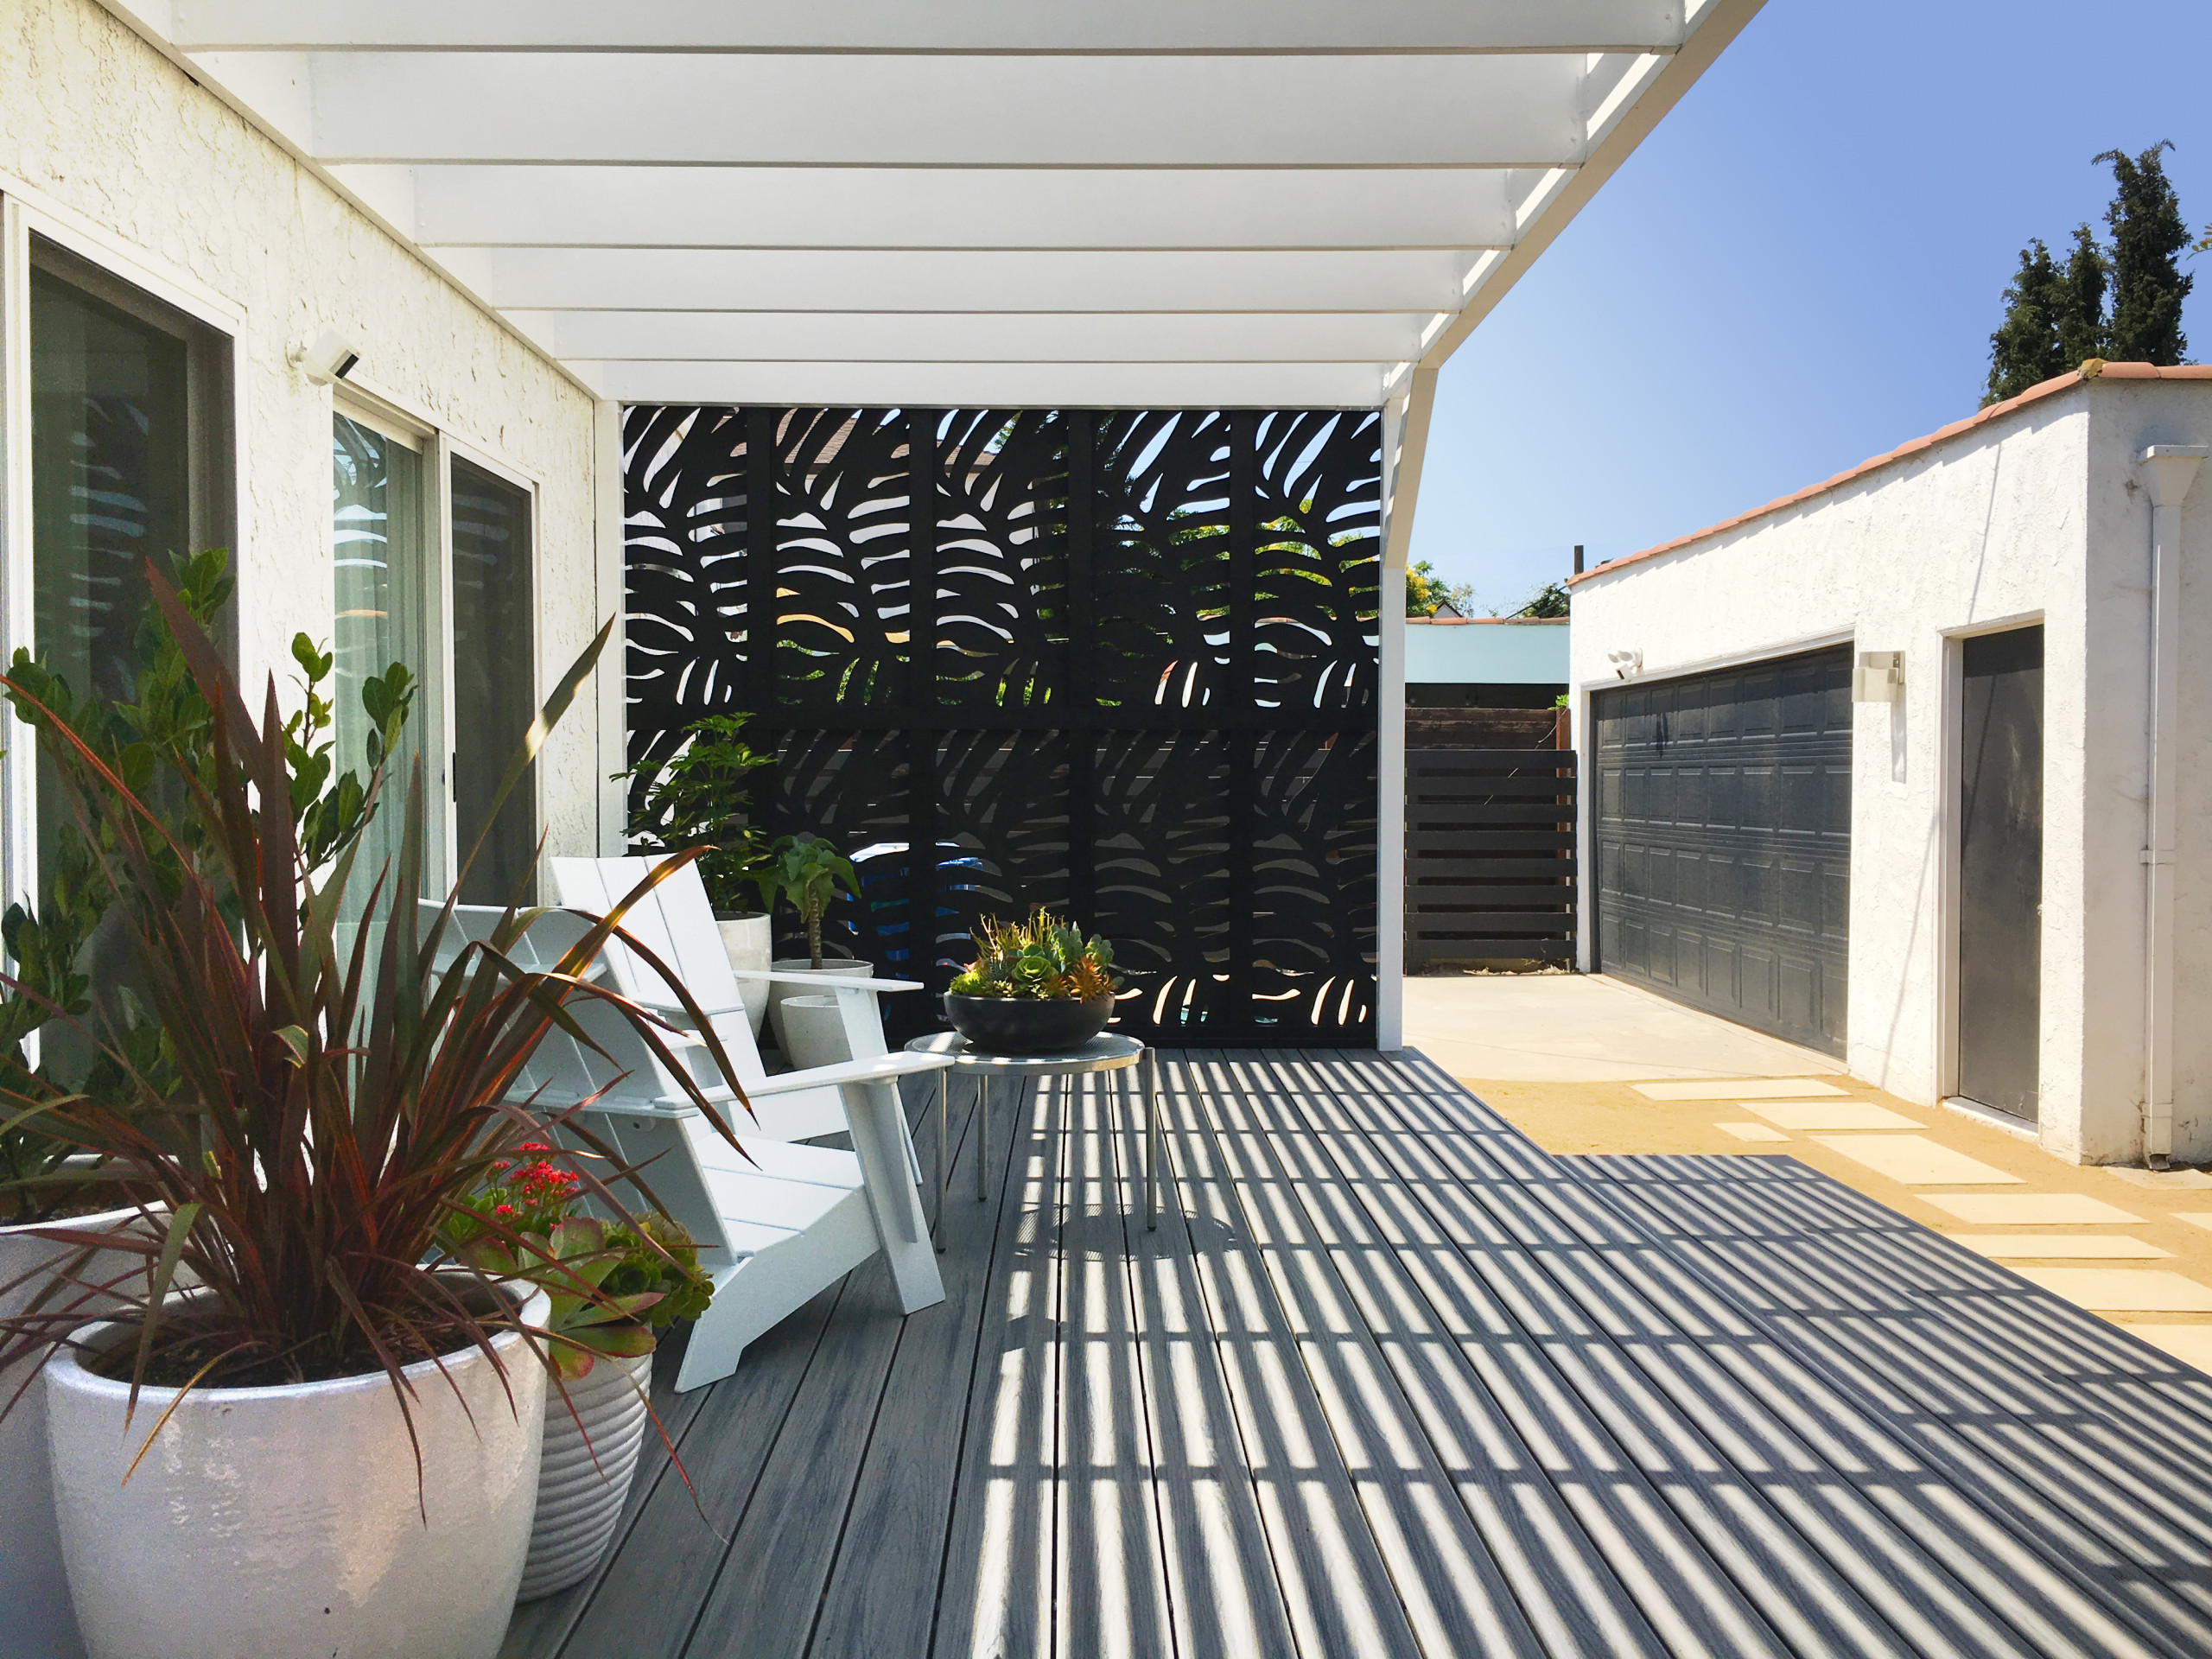 75 Beautiful Landscaping With Decking, Deck And Landscape Design